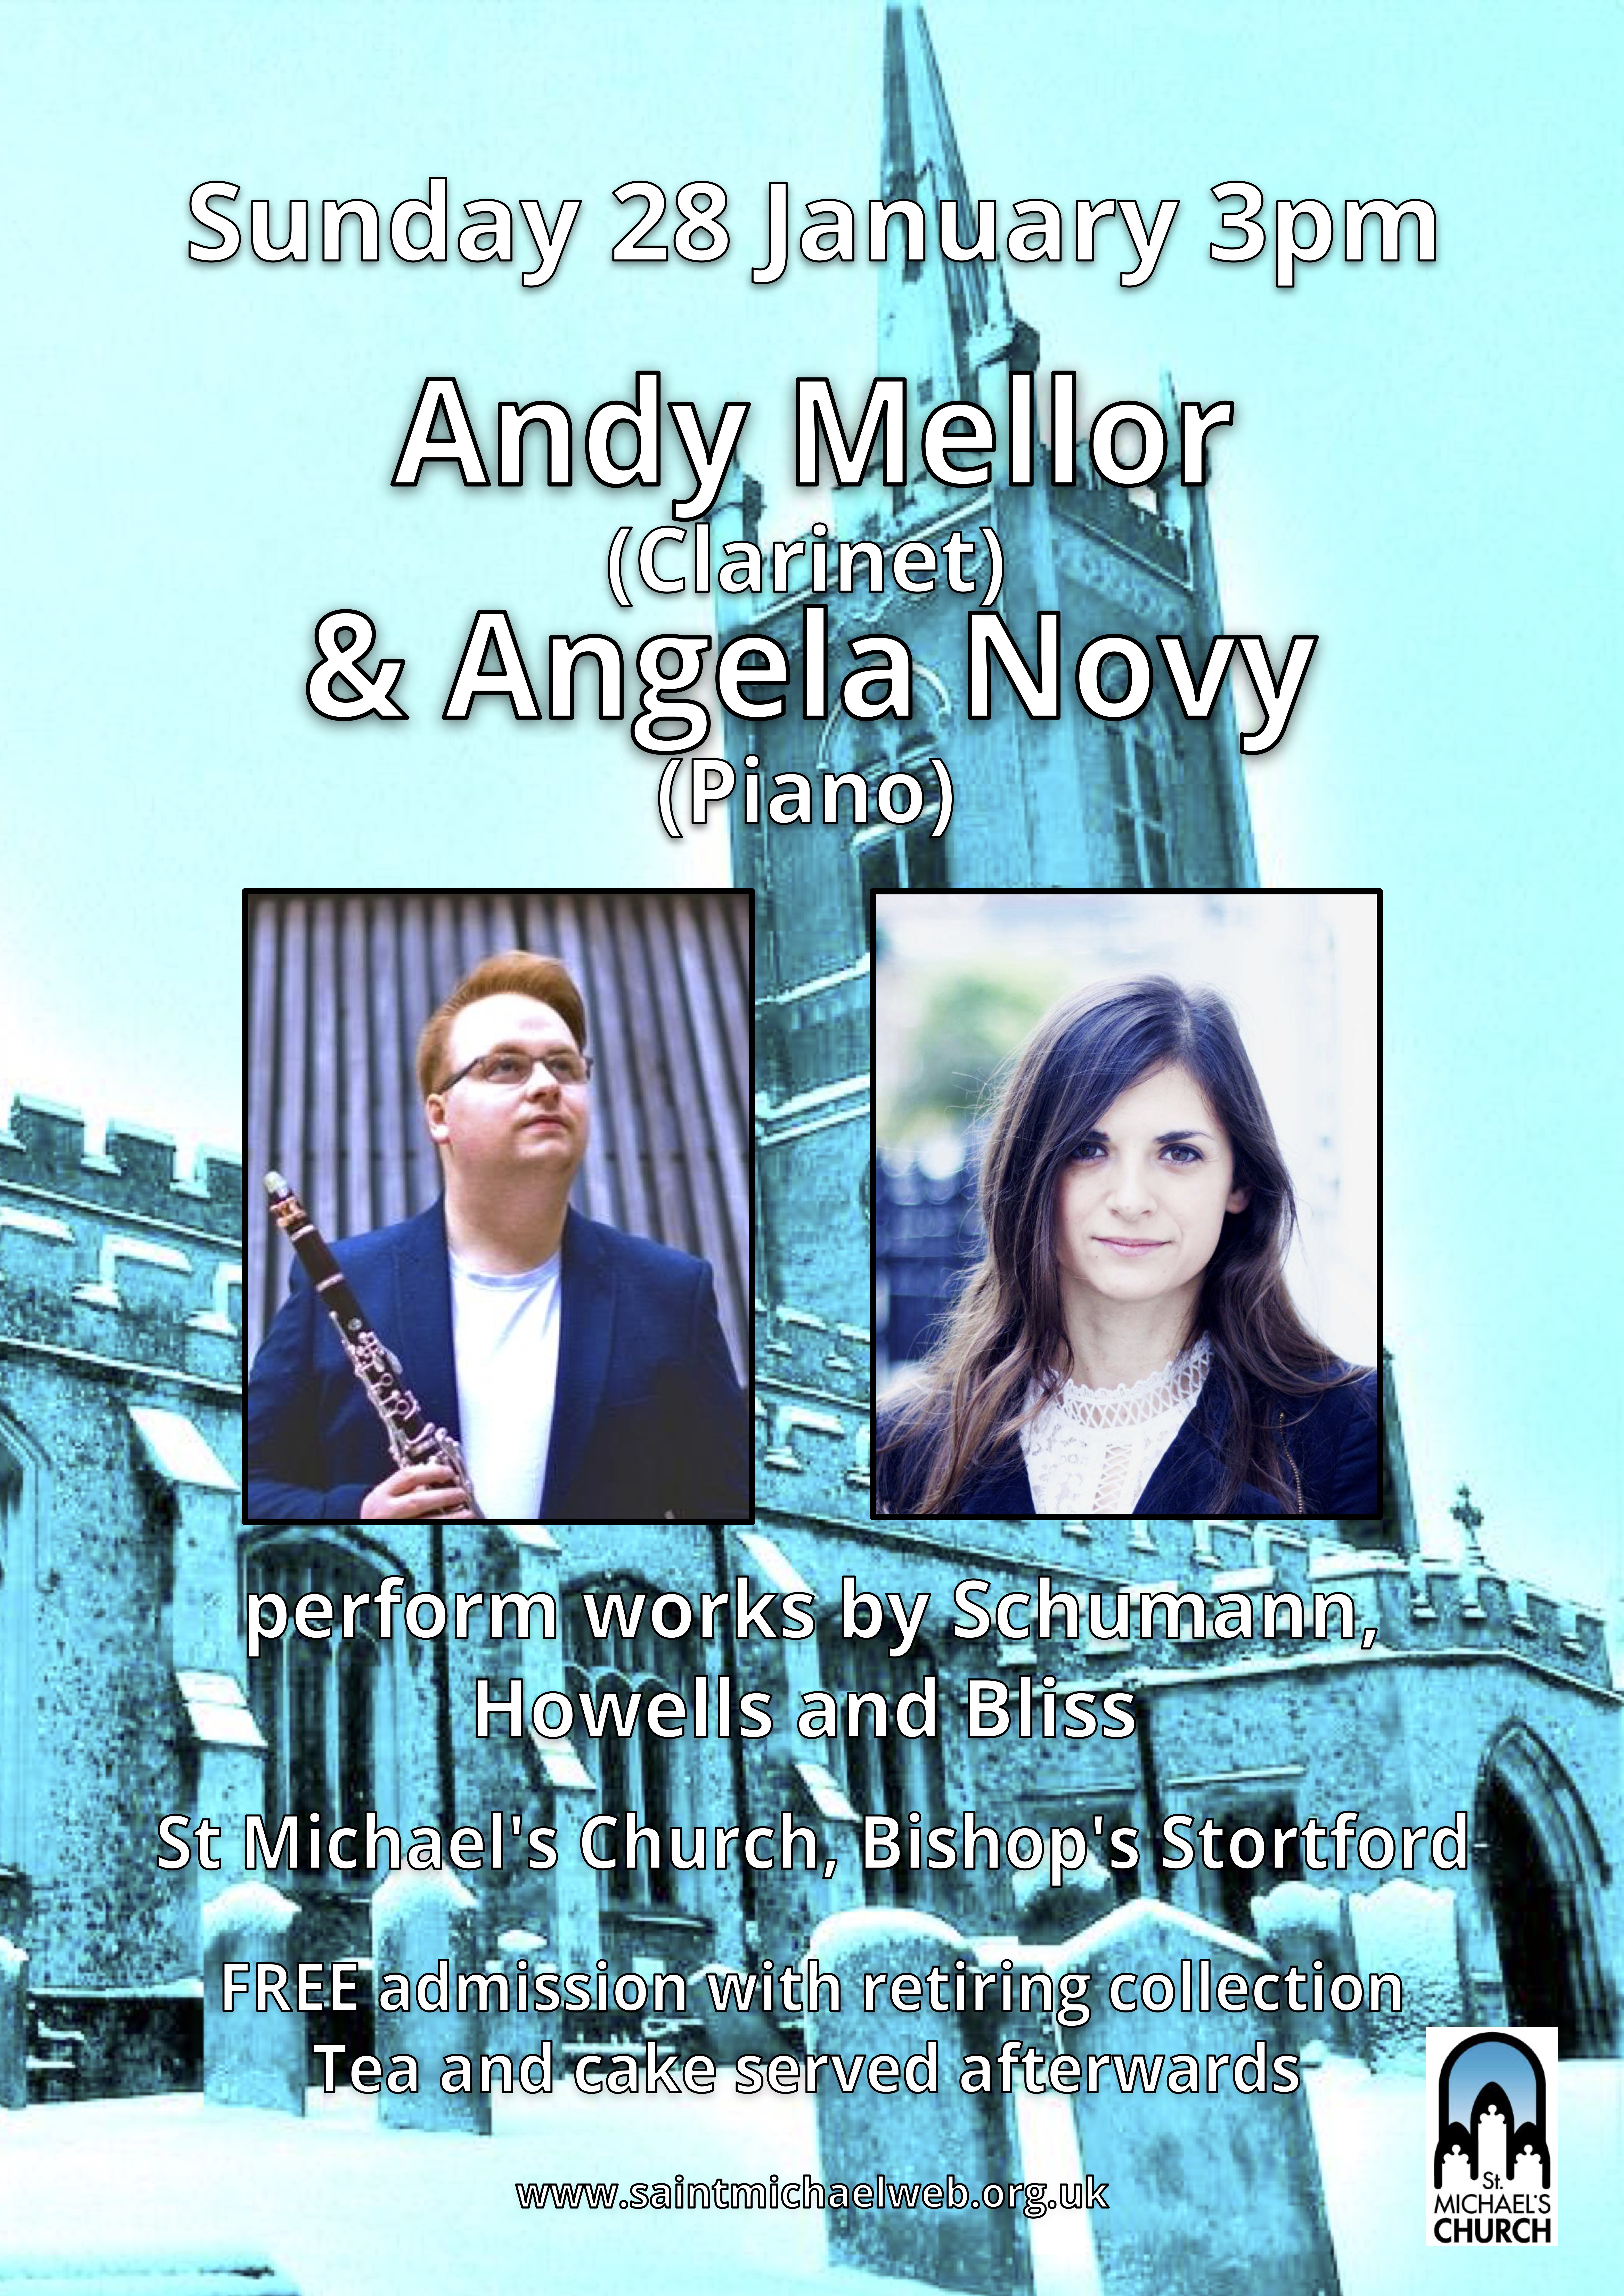 Andy Mellor and Angela Novy 20